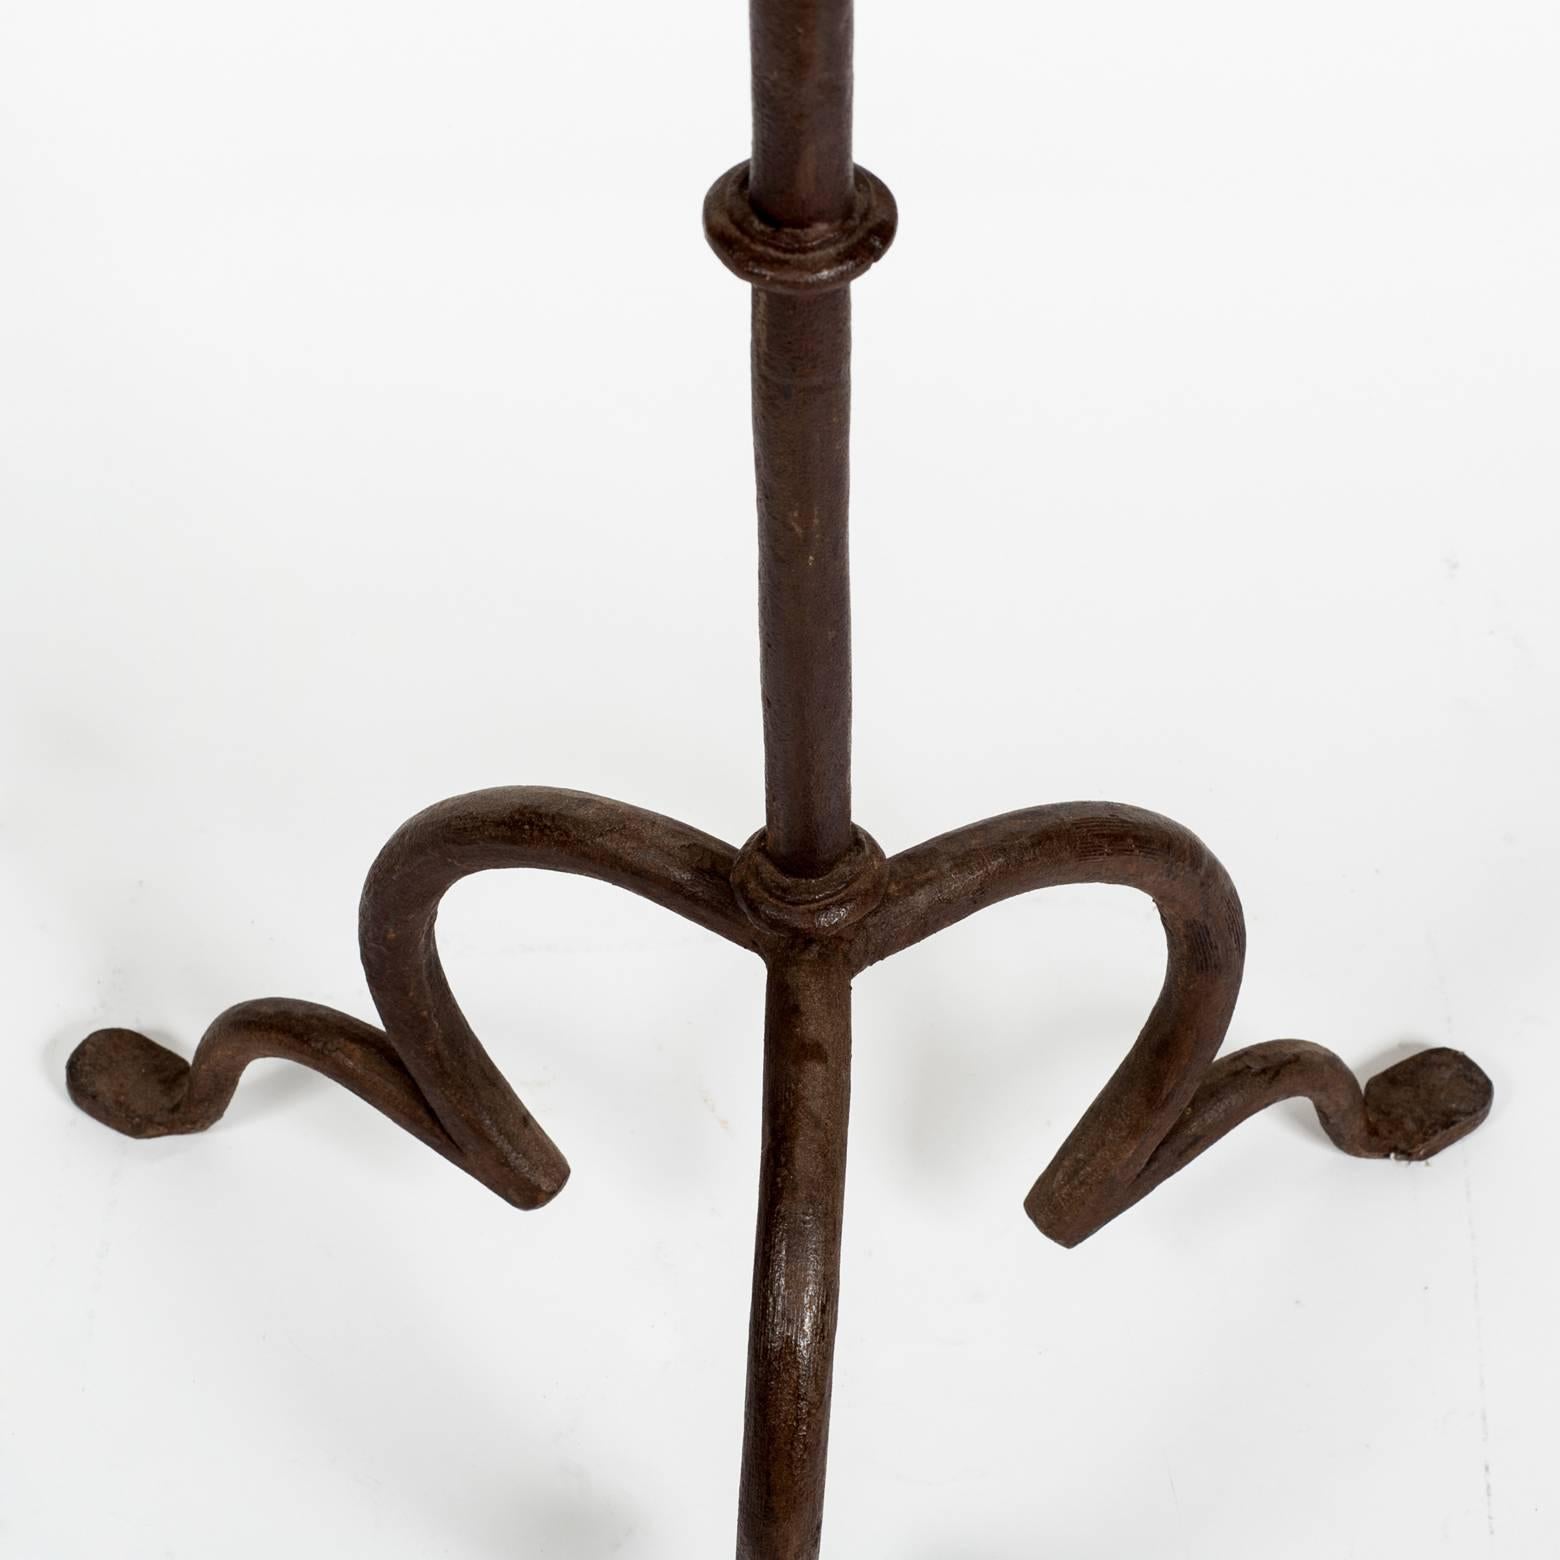 Spanish floor lamp, wrought iron and tripod-shaped base. The lamp shade is the one that appears in the light brown photos.